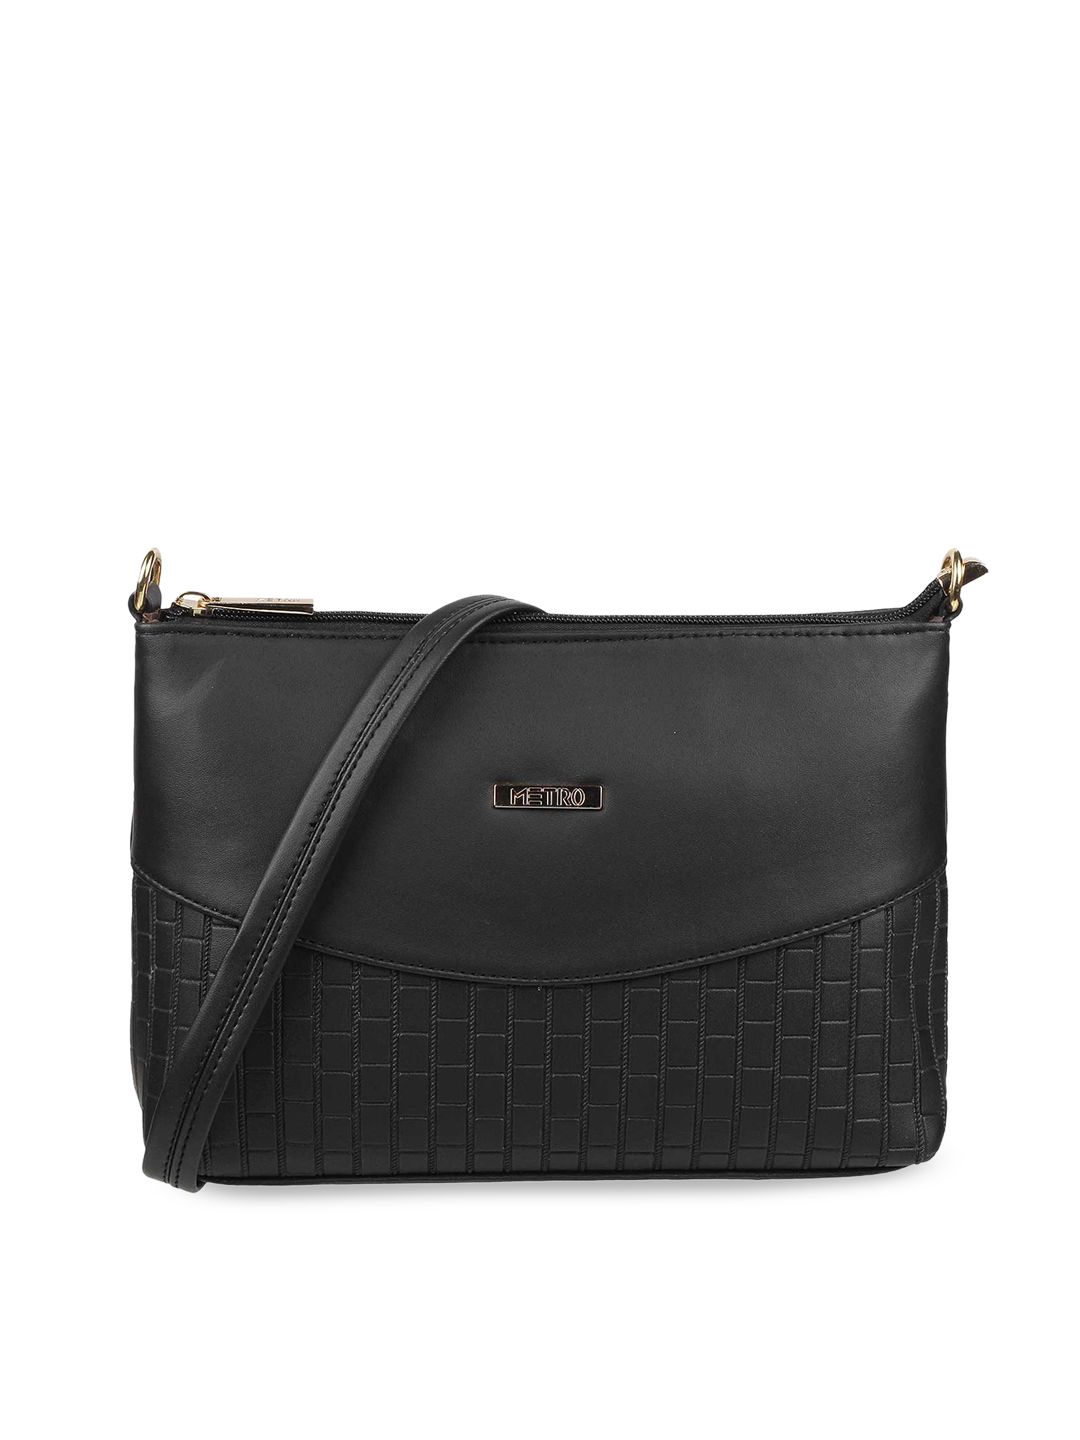 Metro Black PU Structured Sling Bag with Fringed Price in India